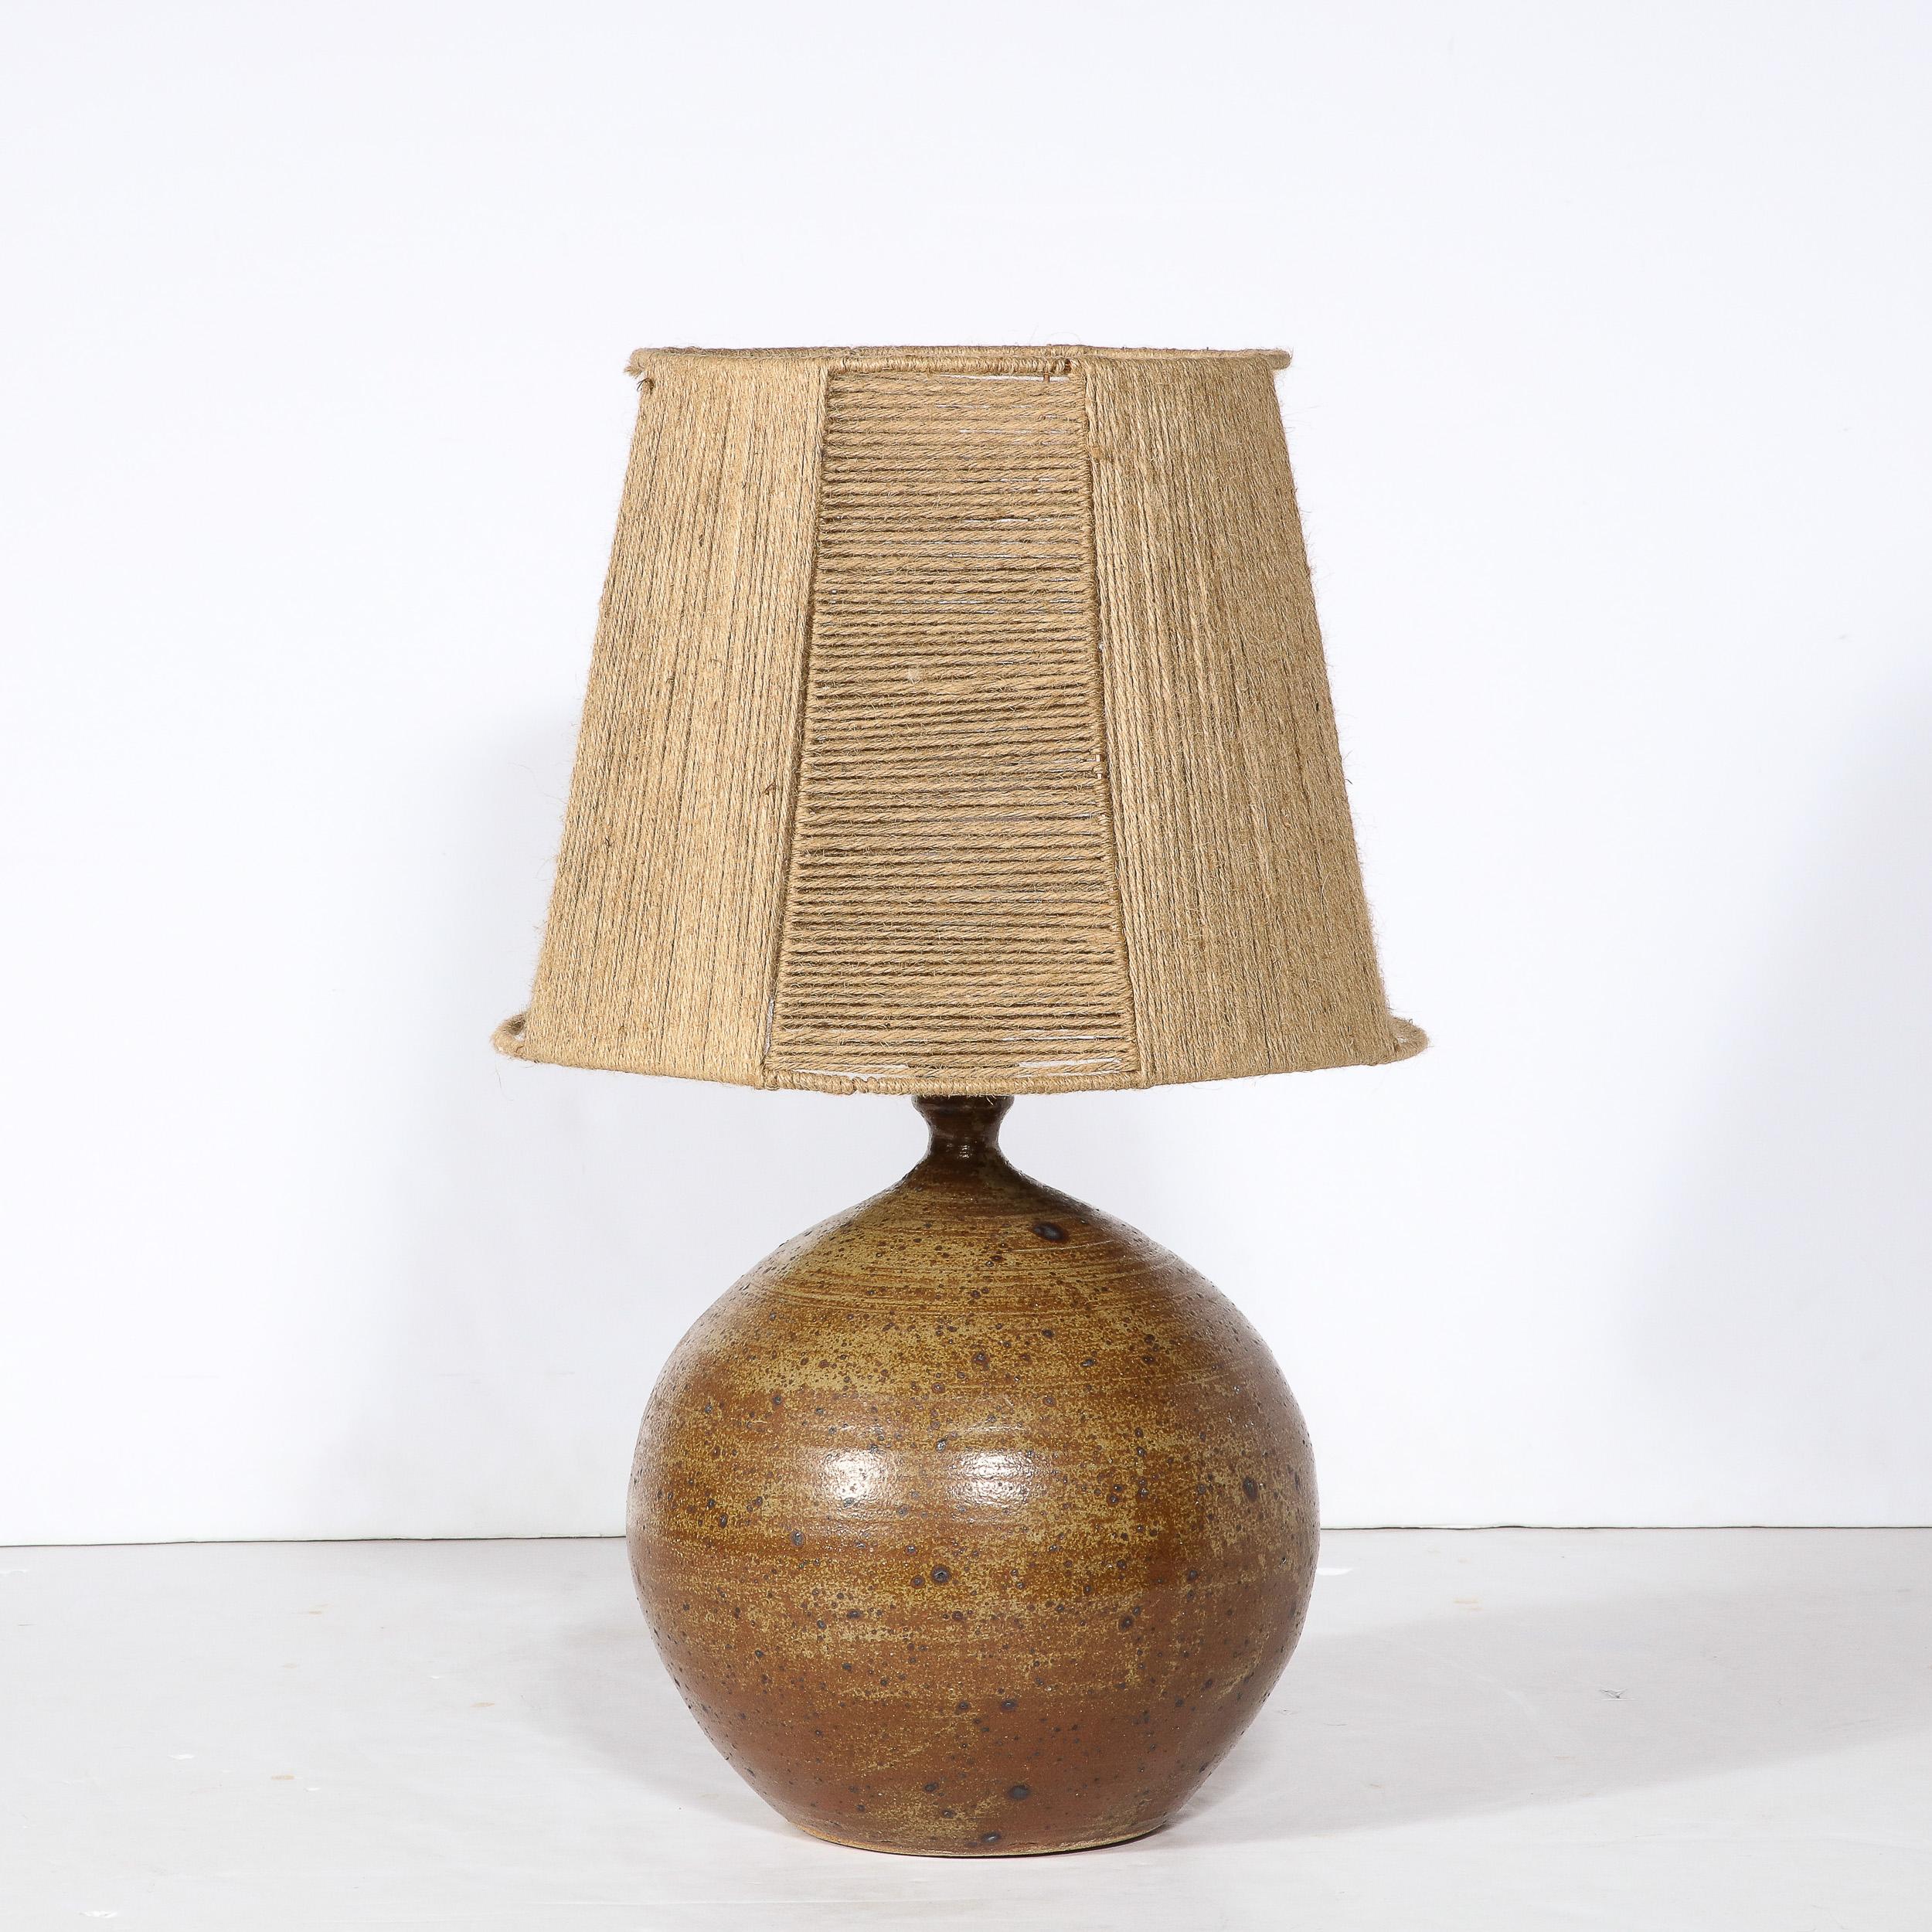 French Mid-Century Modern Ceramic Table Lamp in Burnt Umber Glaze with Hatched Twine